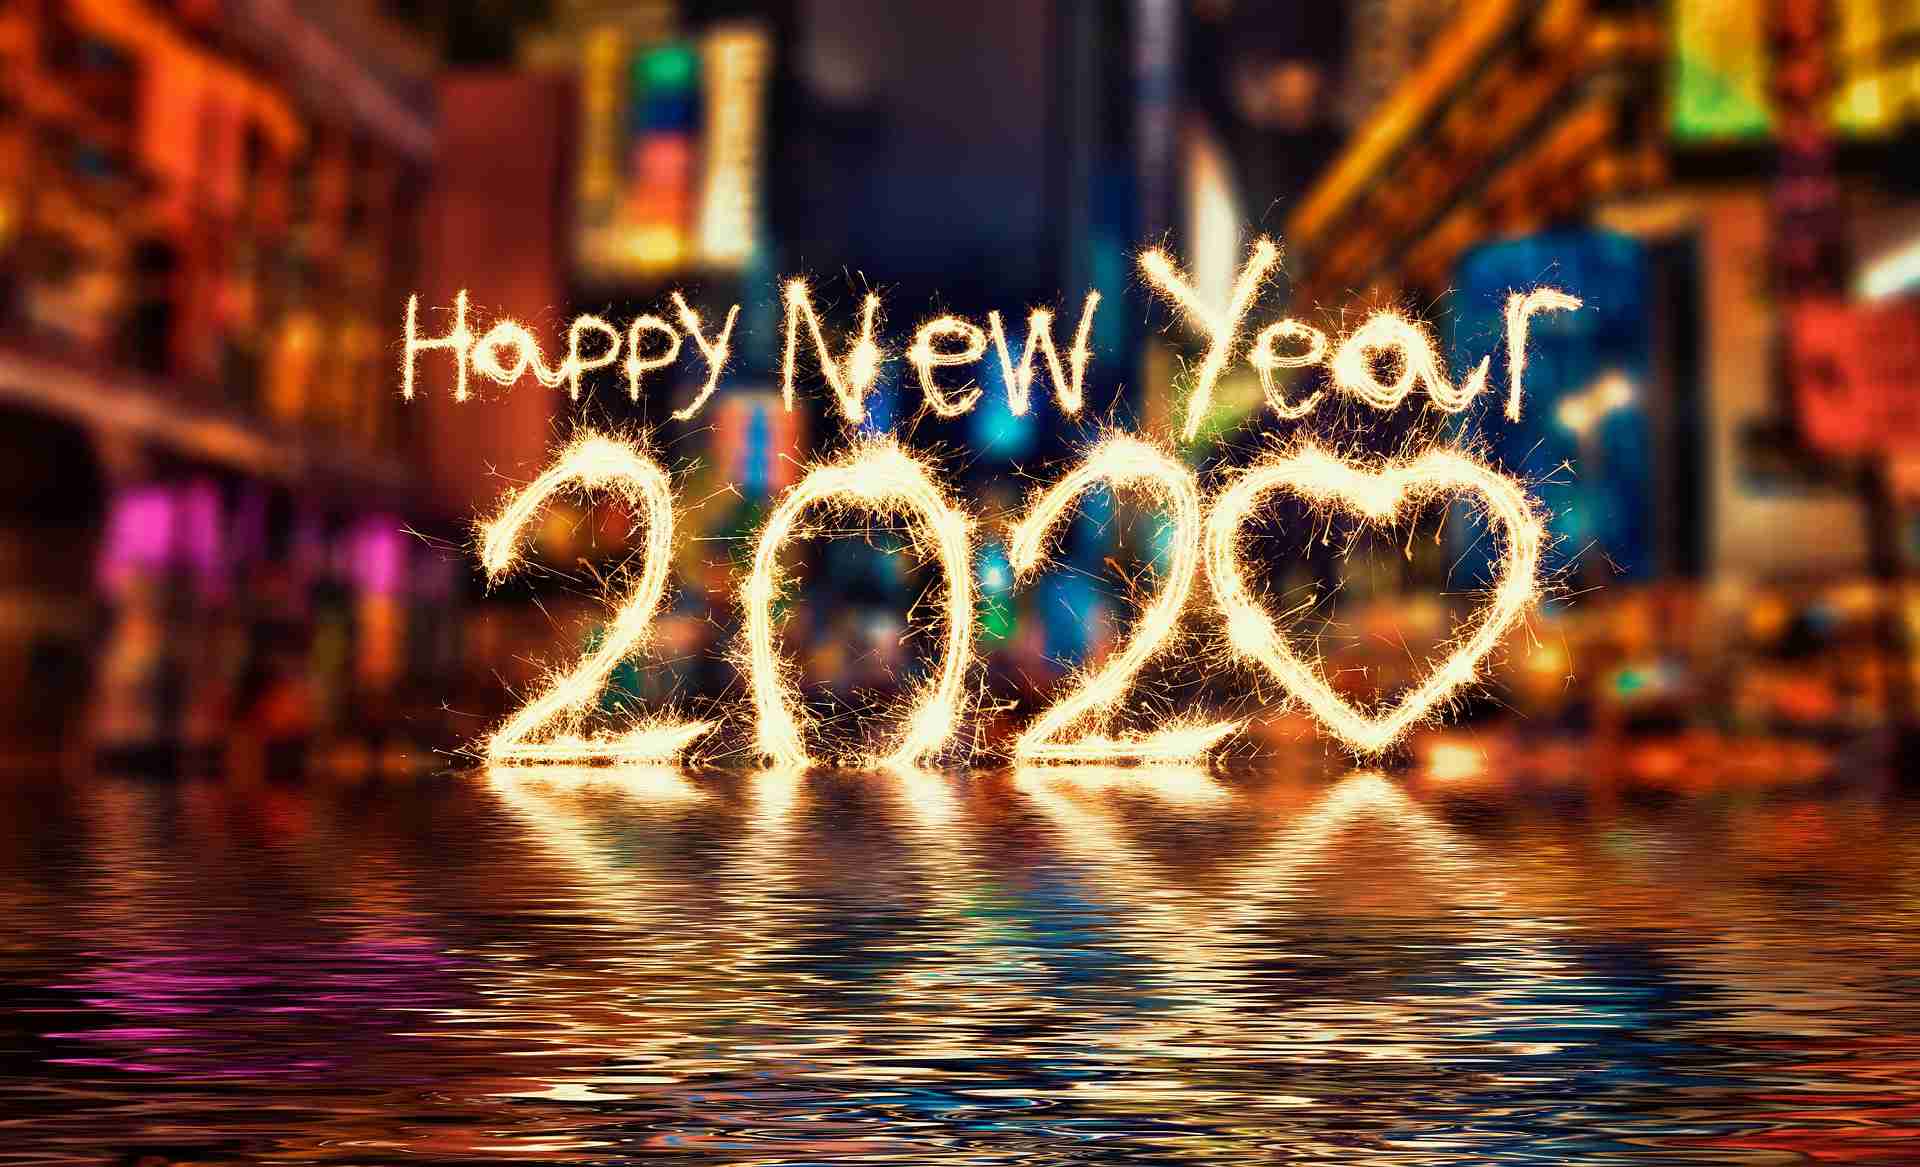 Happy New Year 2020 Wallpaper & Image Download